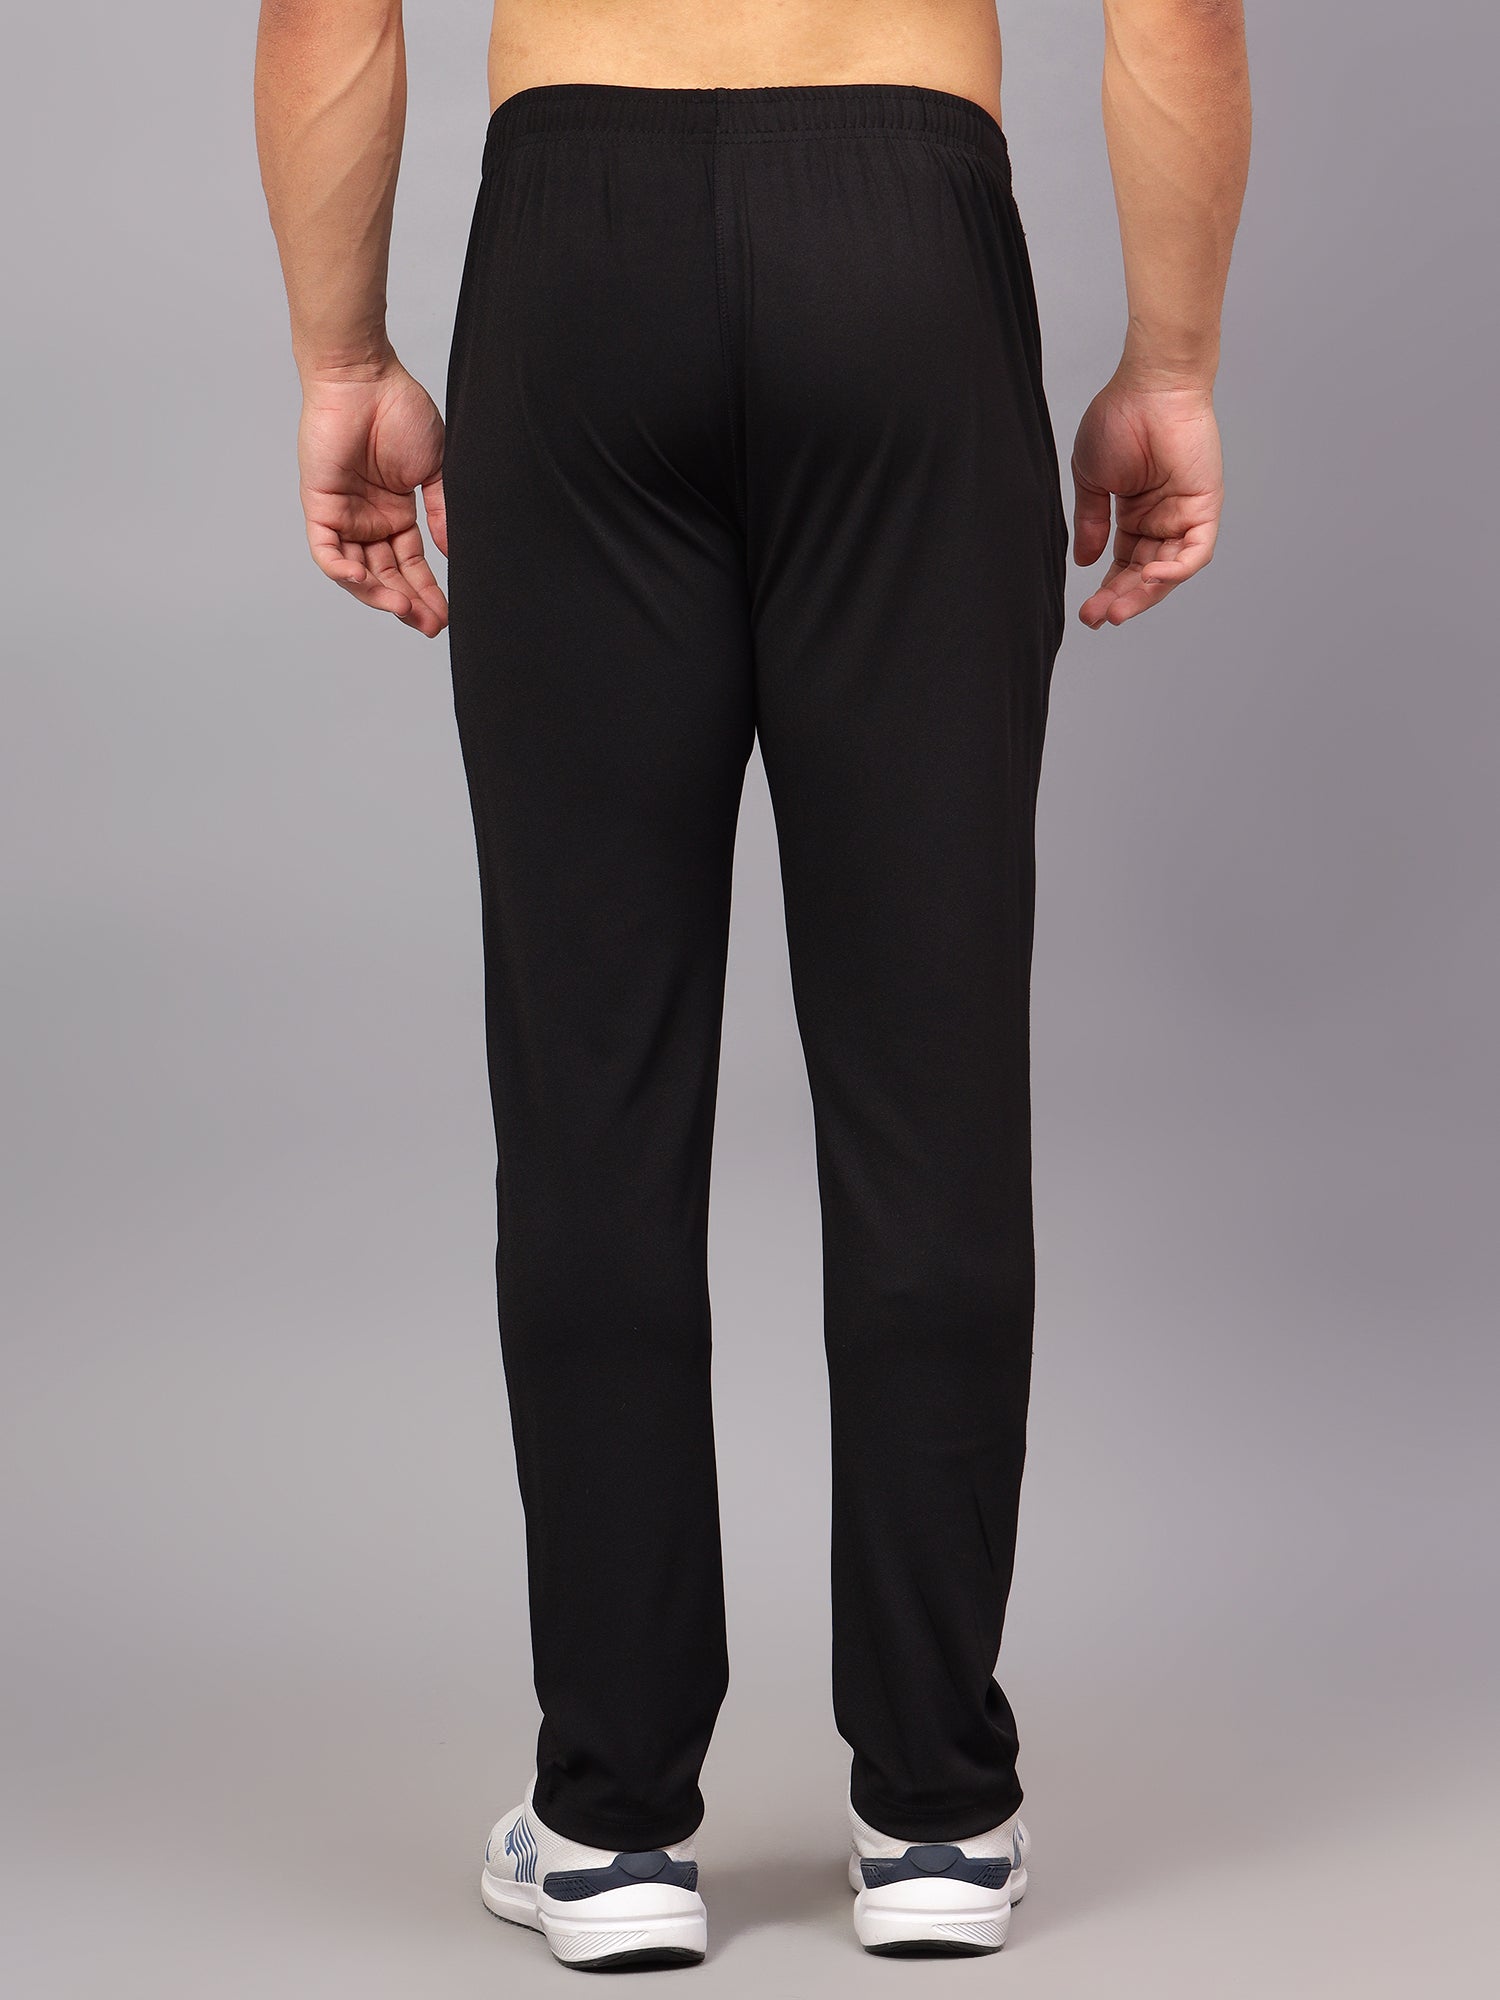 Track Pant - Black colour, buy online in India at cheap price - Scholar  Shoppe